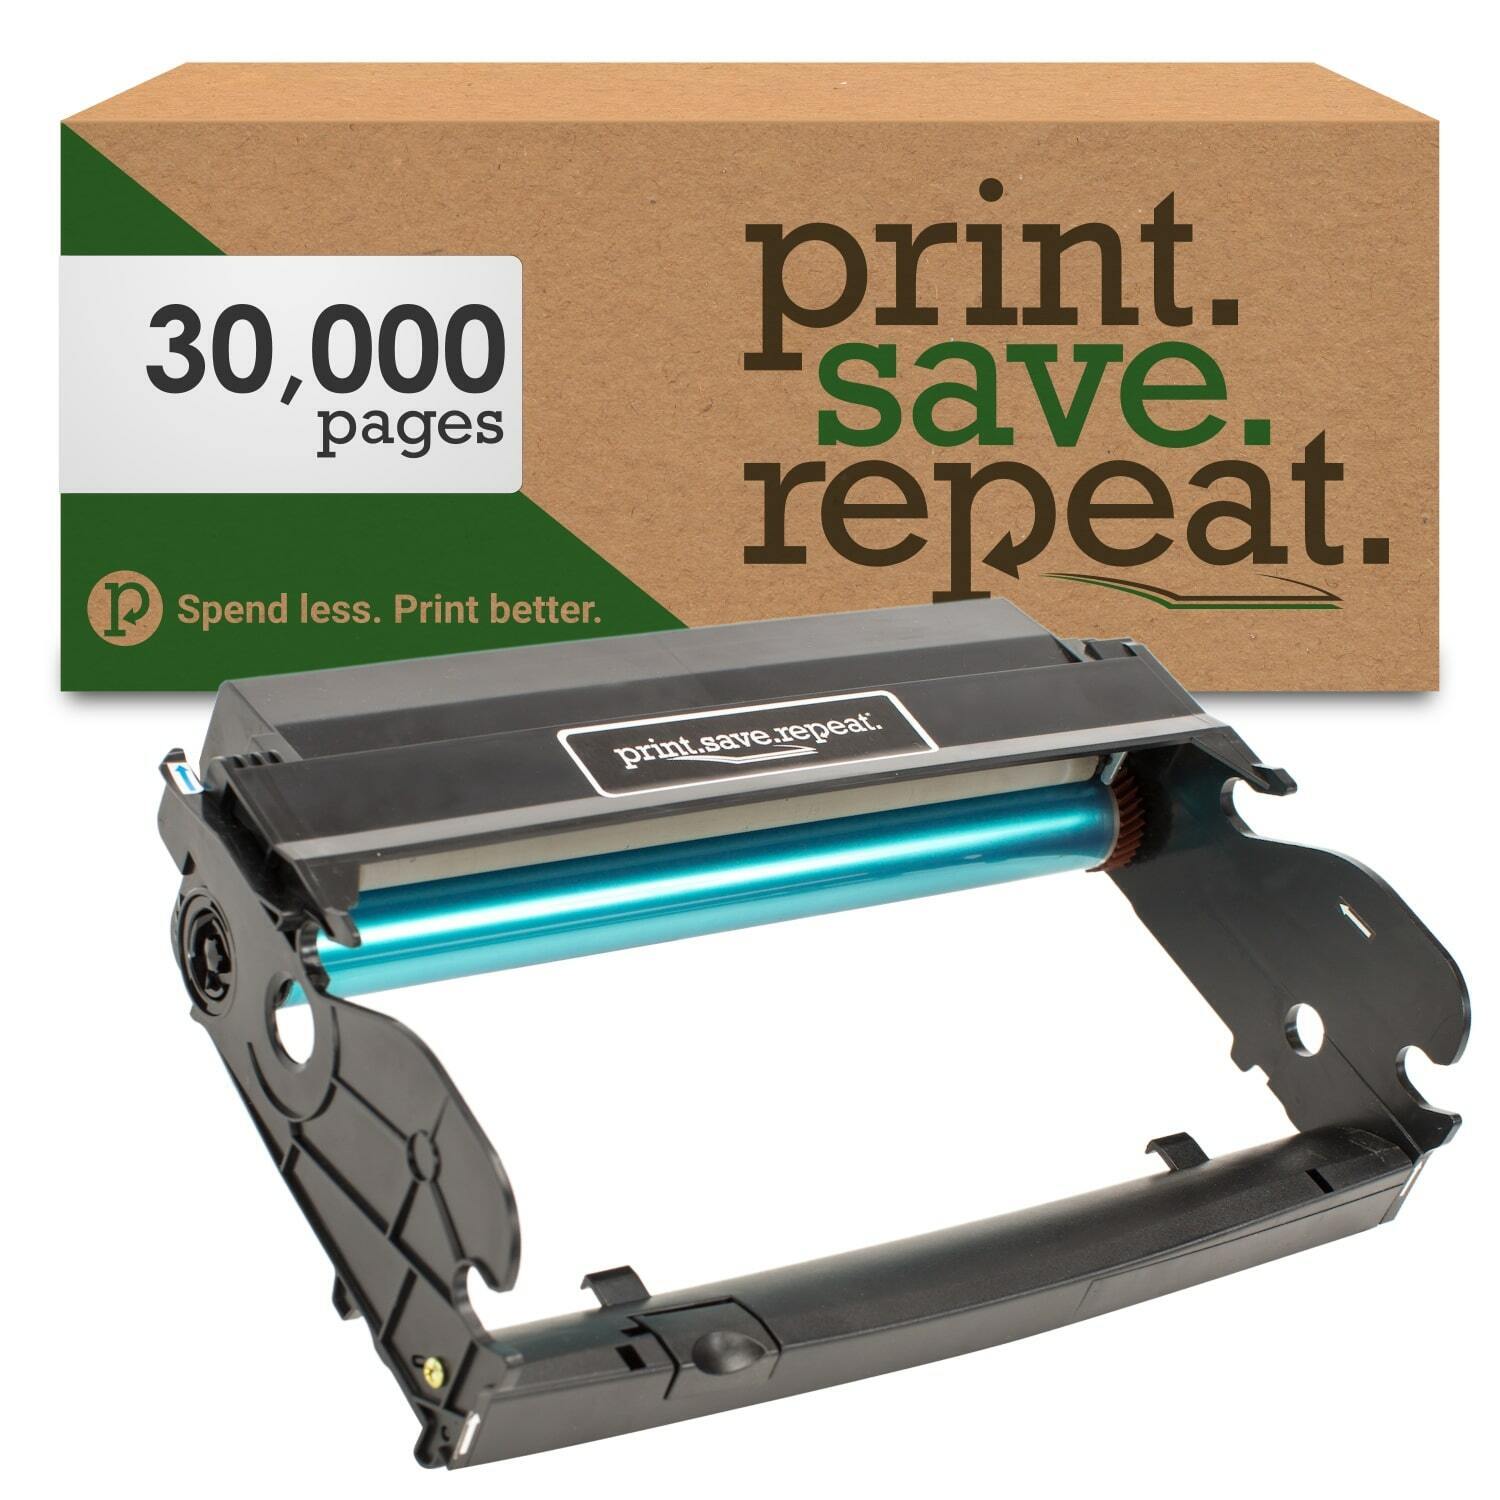 Print.Save.Repeat. Lexmark E260X22G Photoconductor PC Drum Kit [30K Pages]